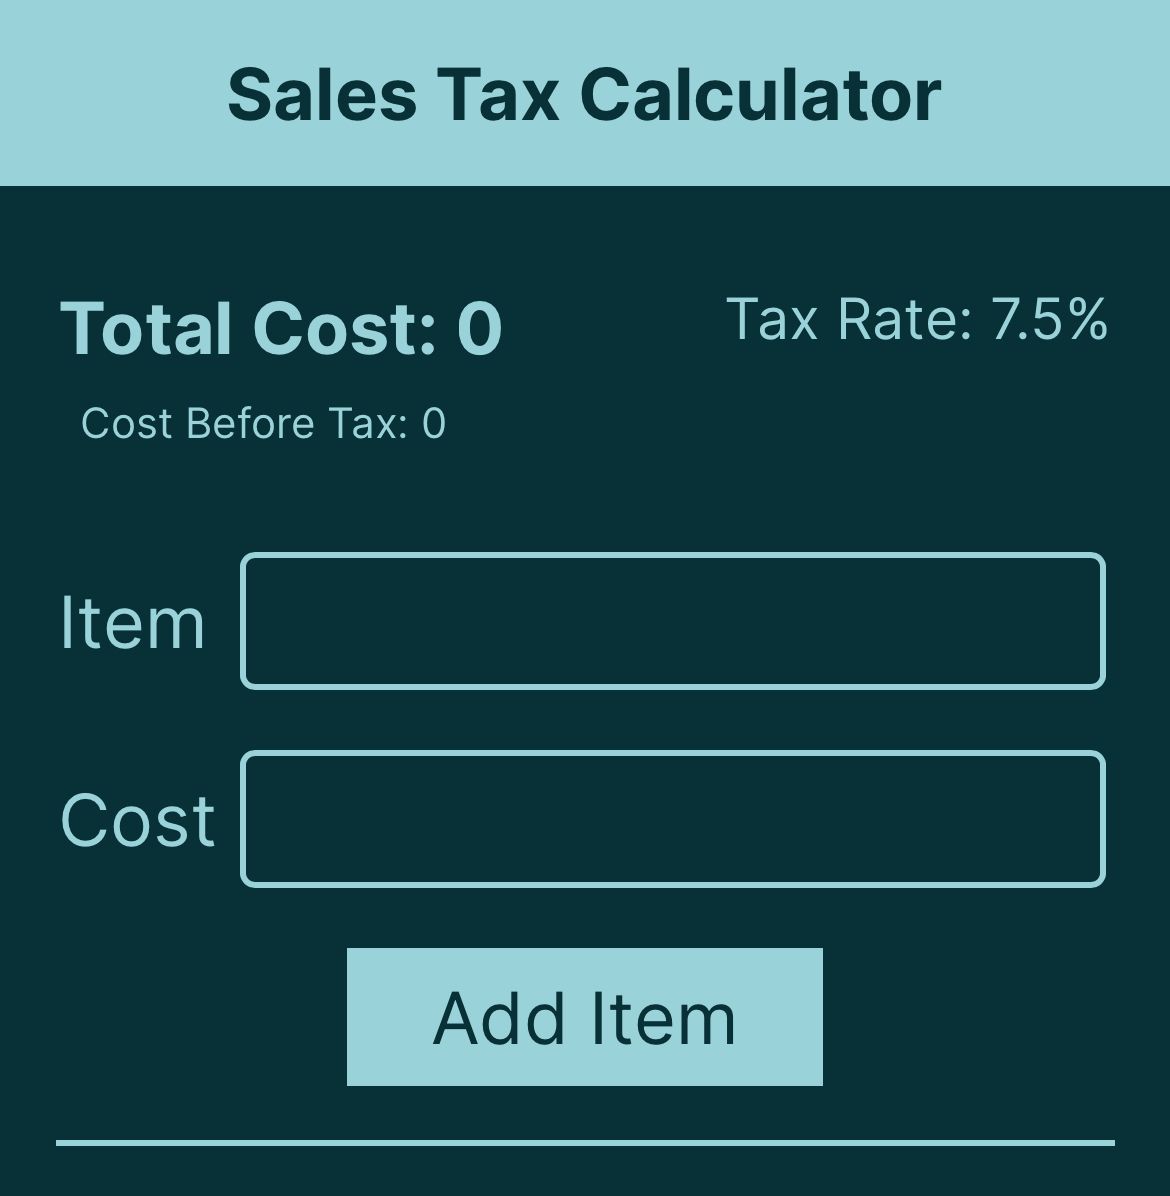 With Tax Calculator